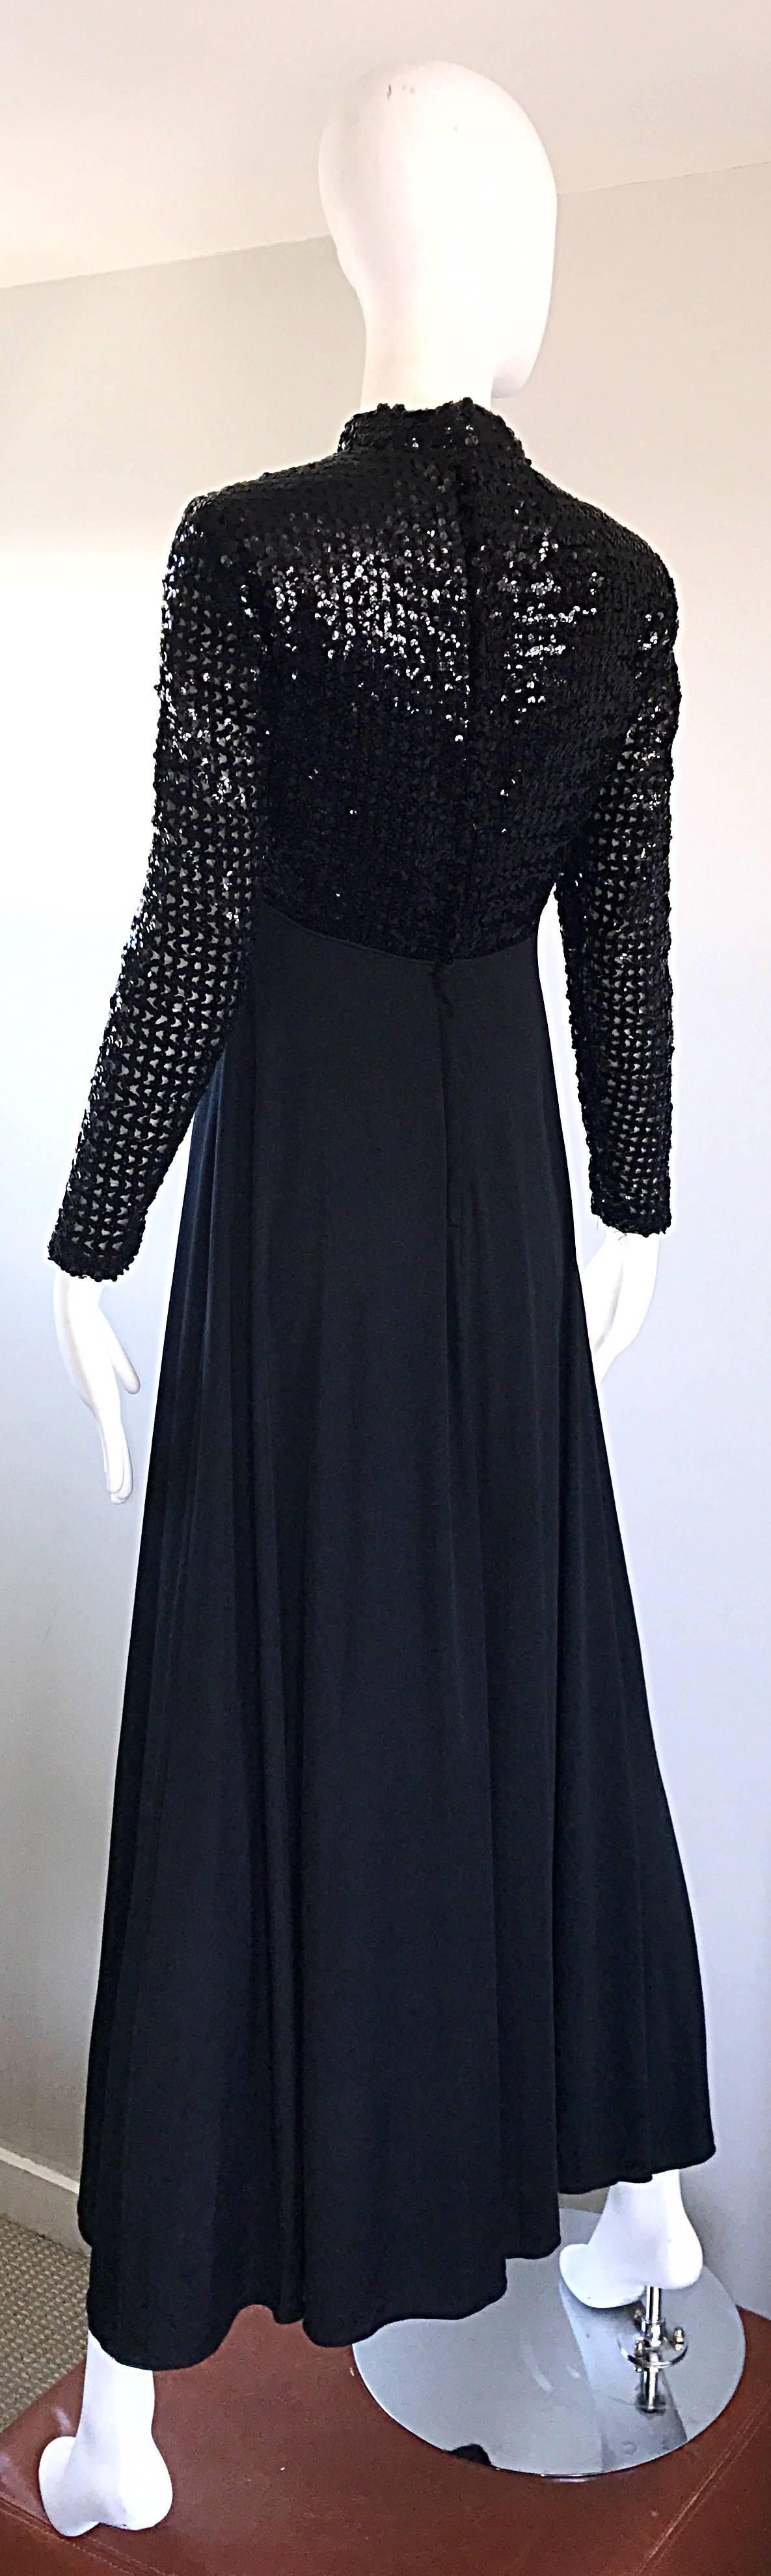 Amazing 1970s Black Sequin Long Sleeve High Neck Vintage 70s Jersey Evening Gown 3